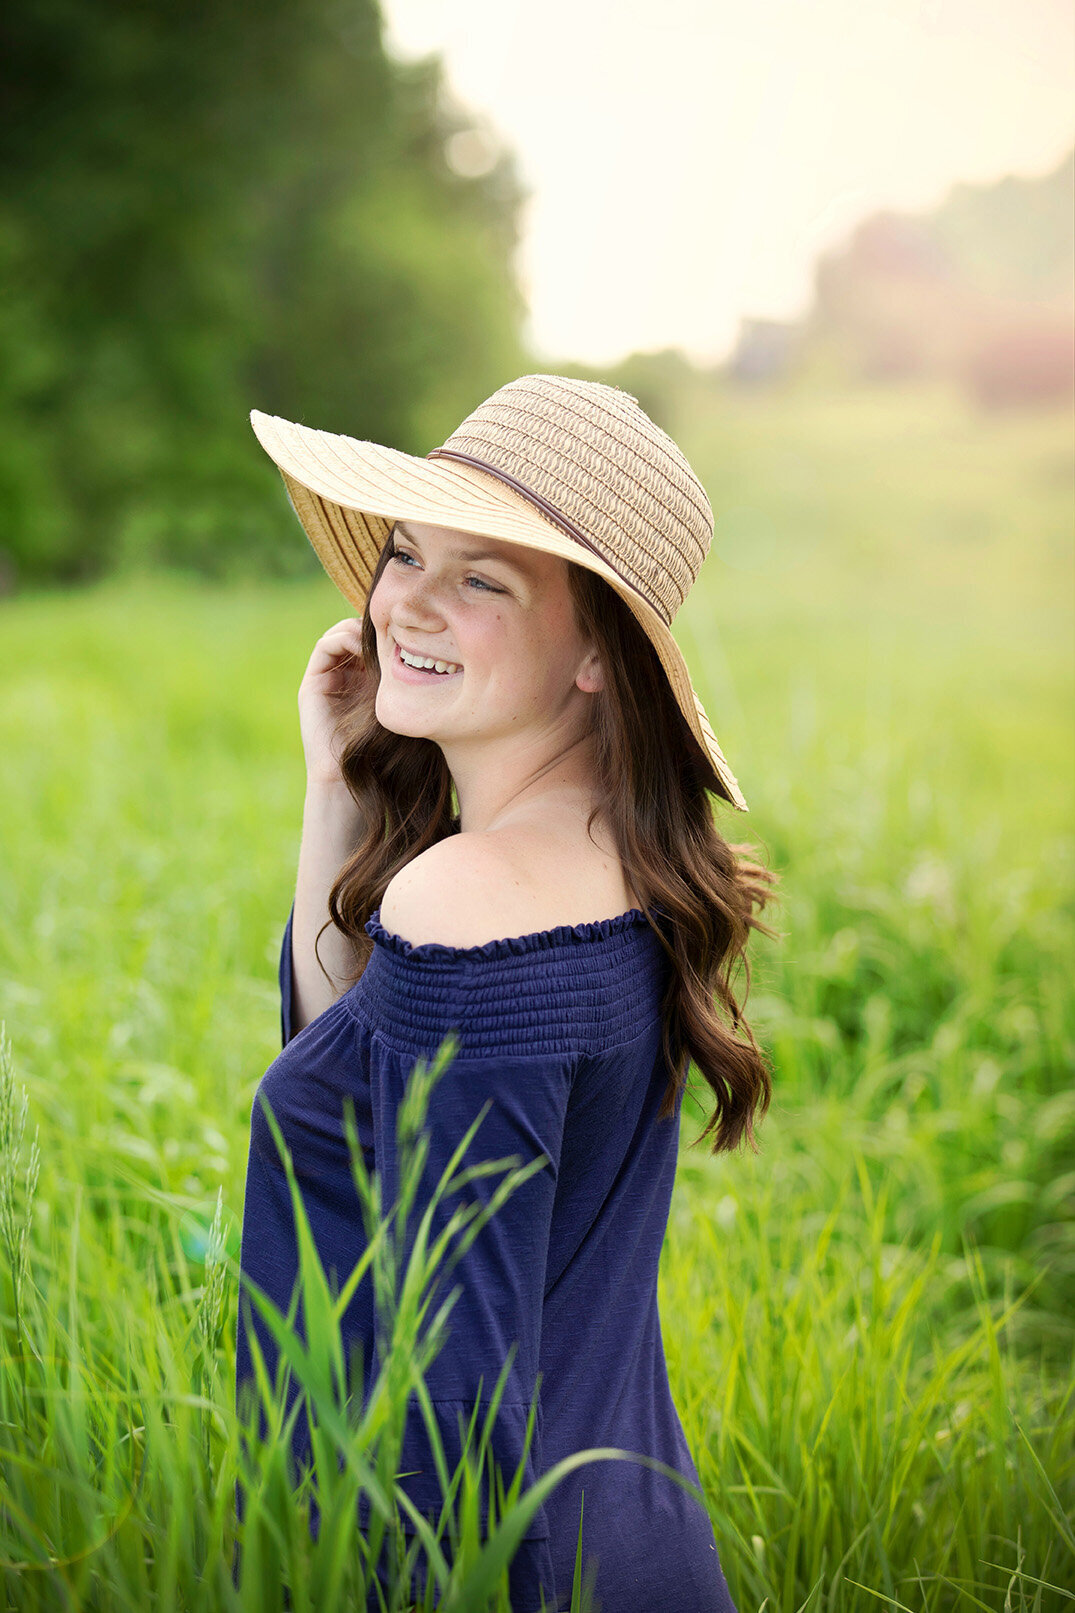 Senior girl wearing blue shirt and floppy hat standing in field of tall grass smiling.